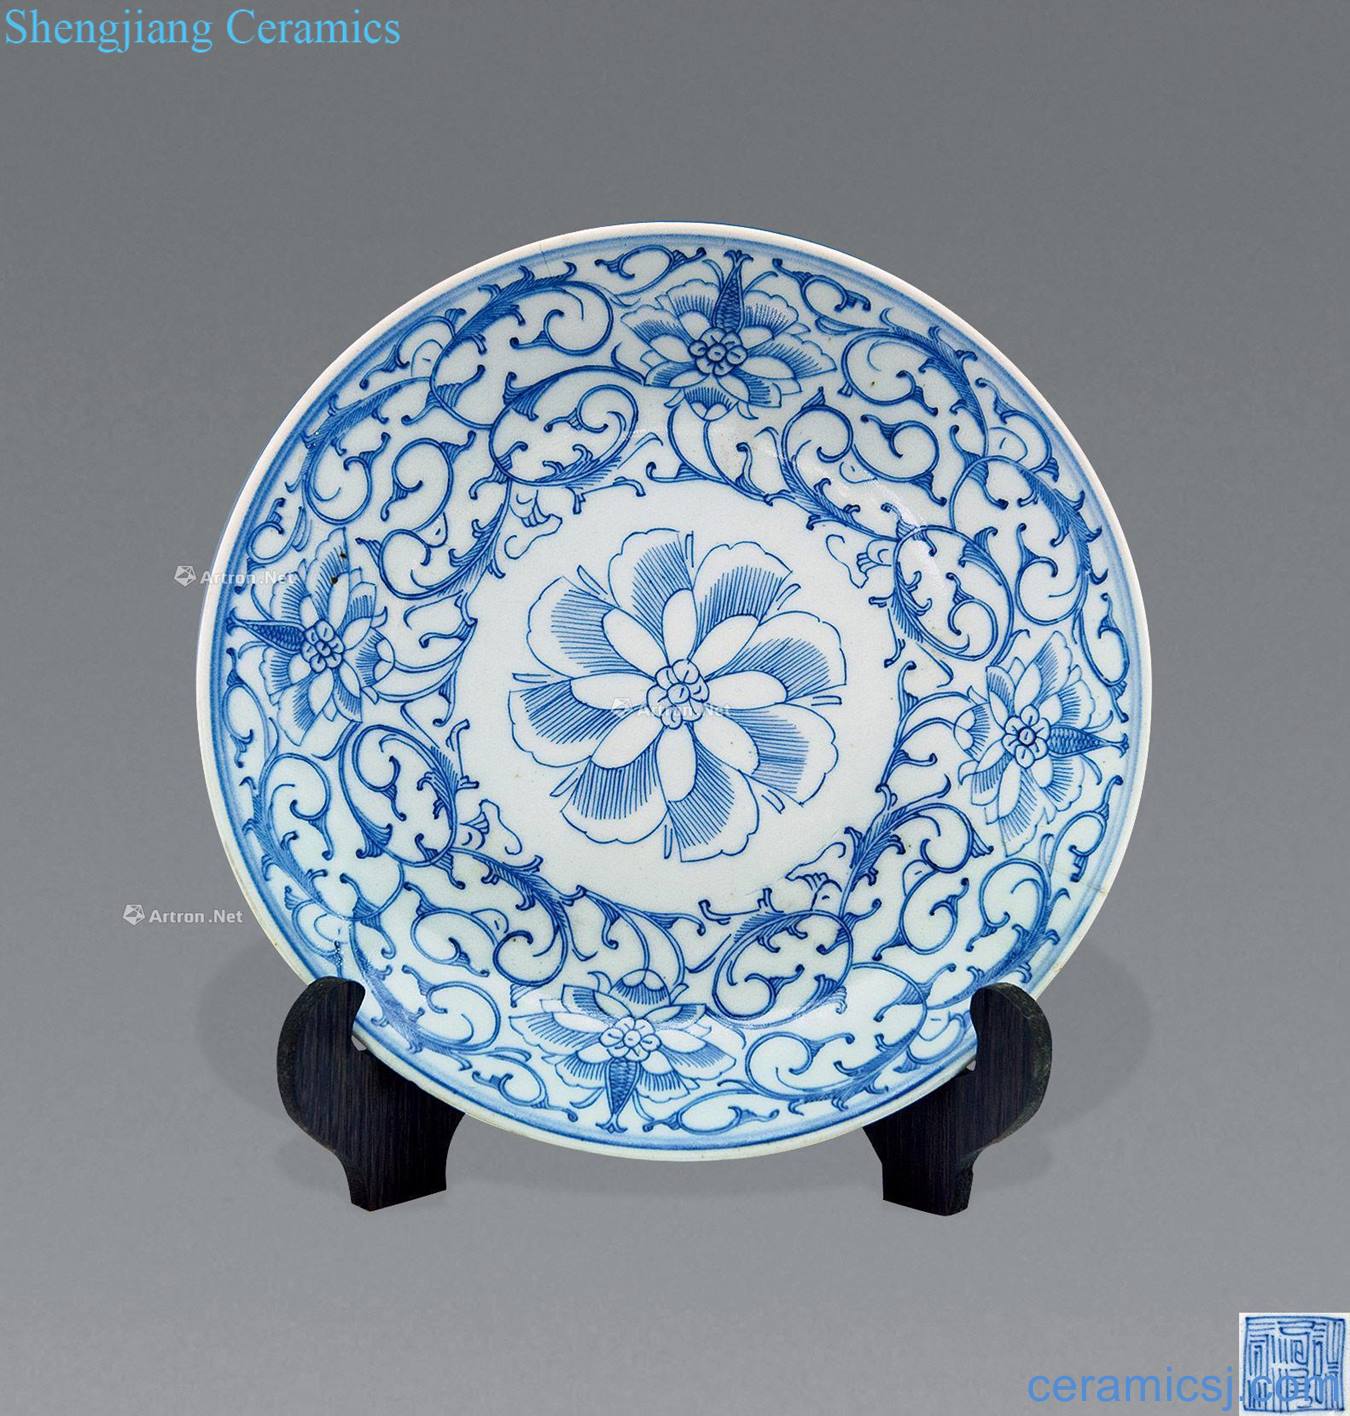 The late qing dynasty Blue and white to admire the dish